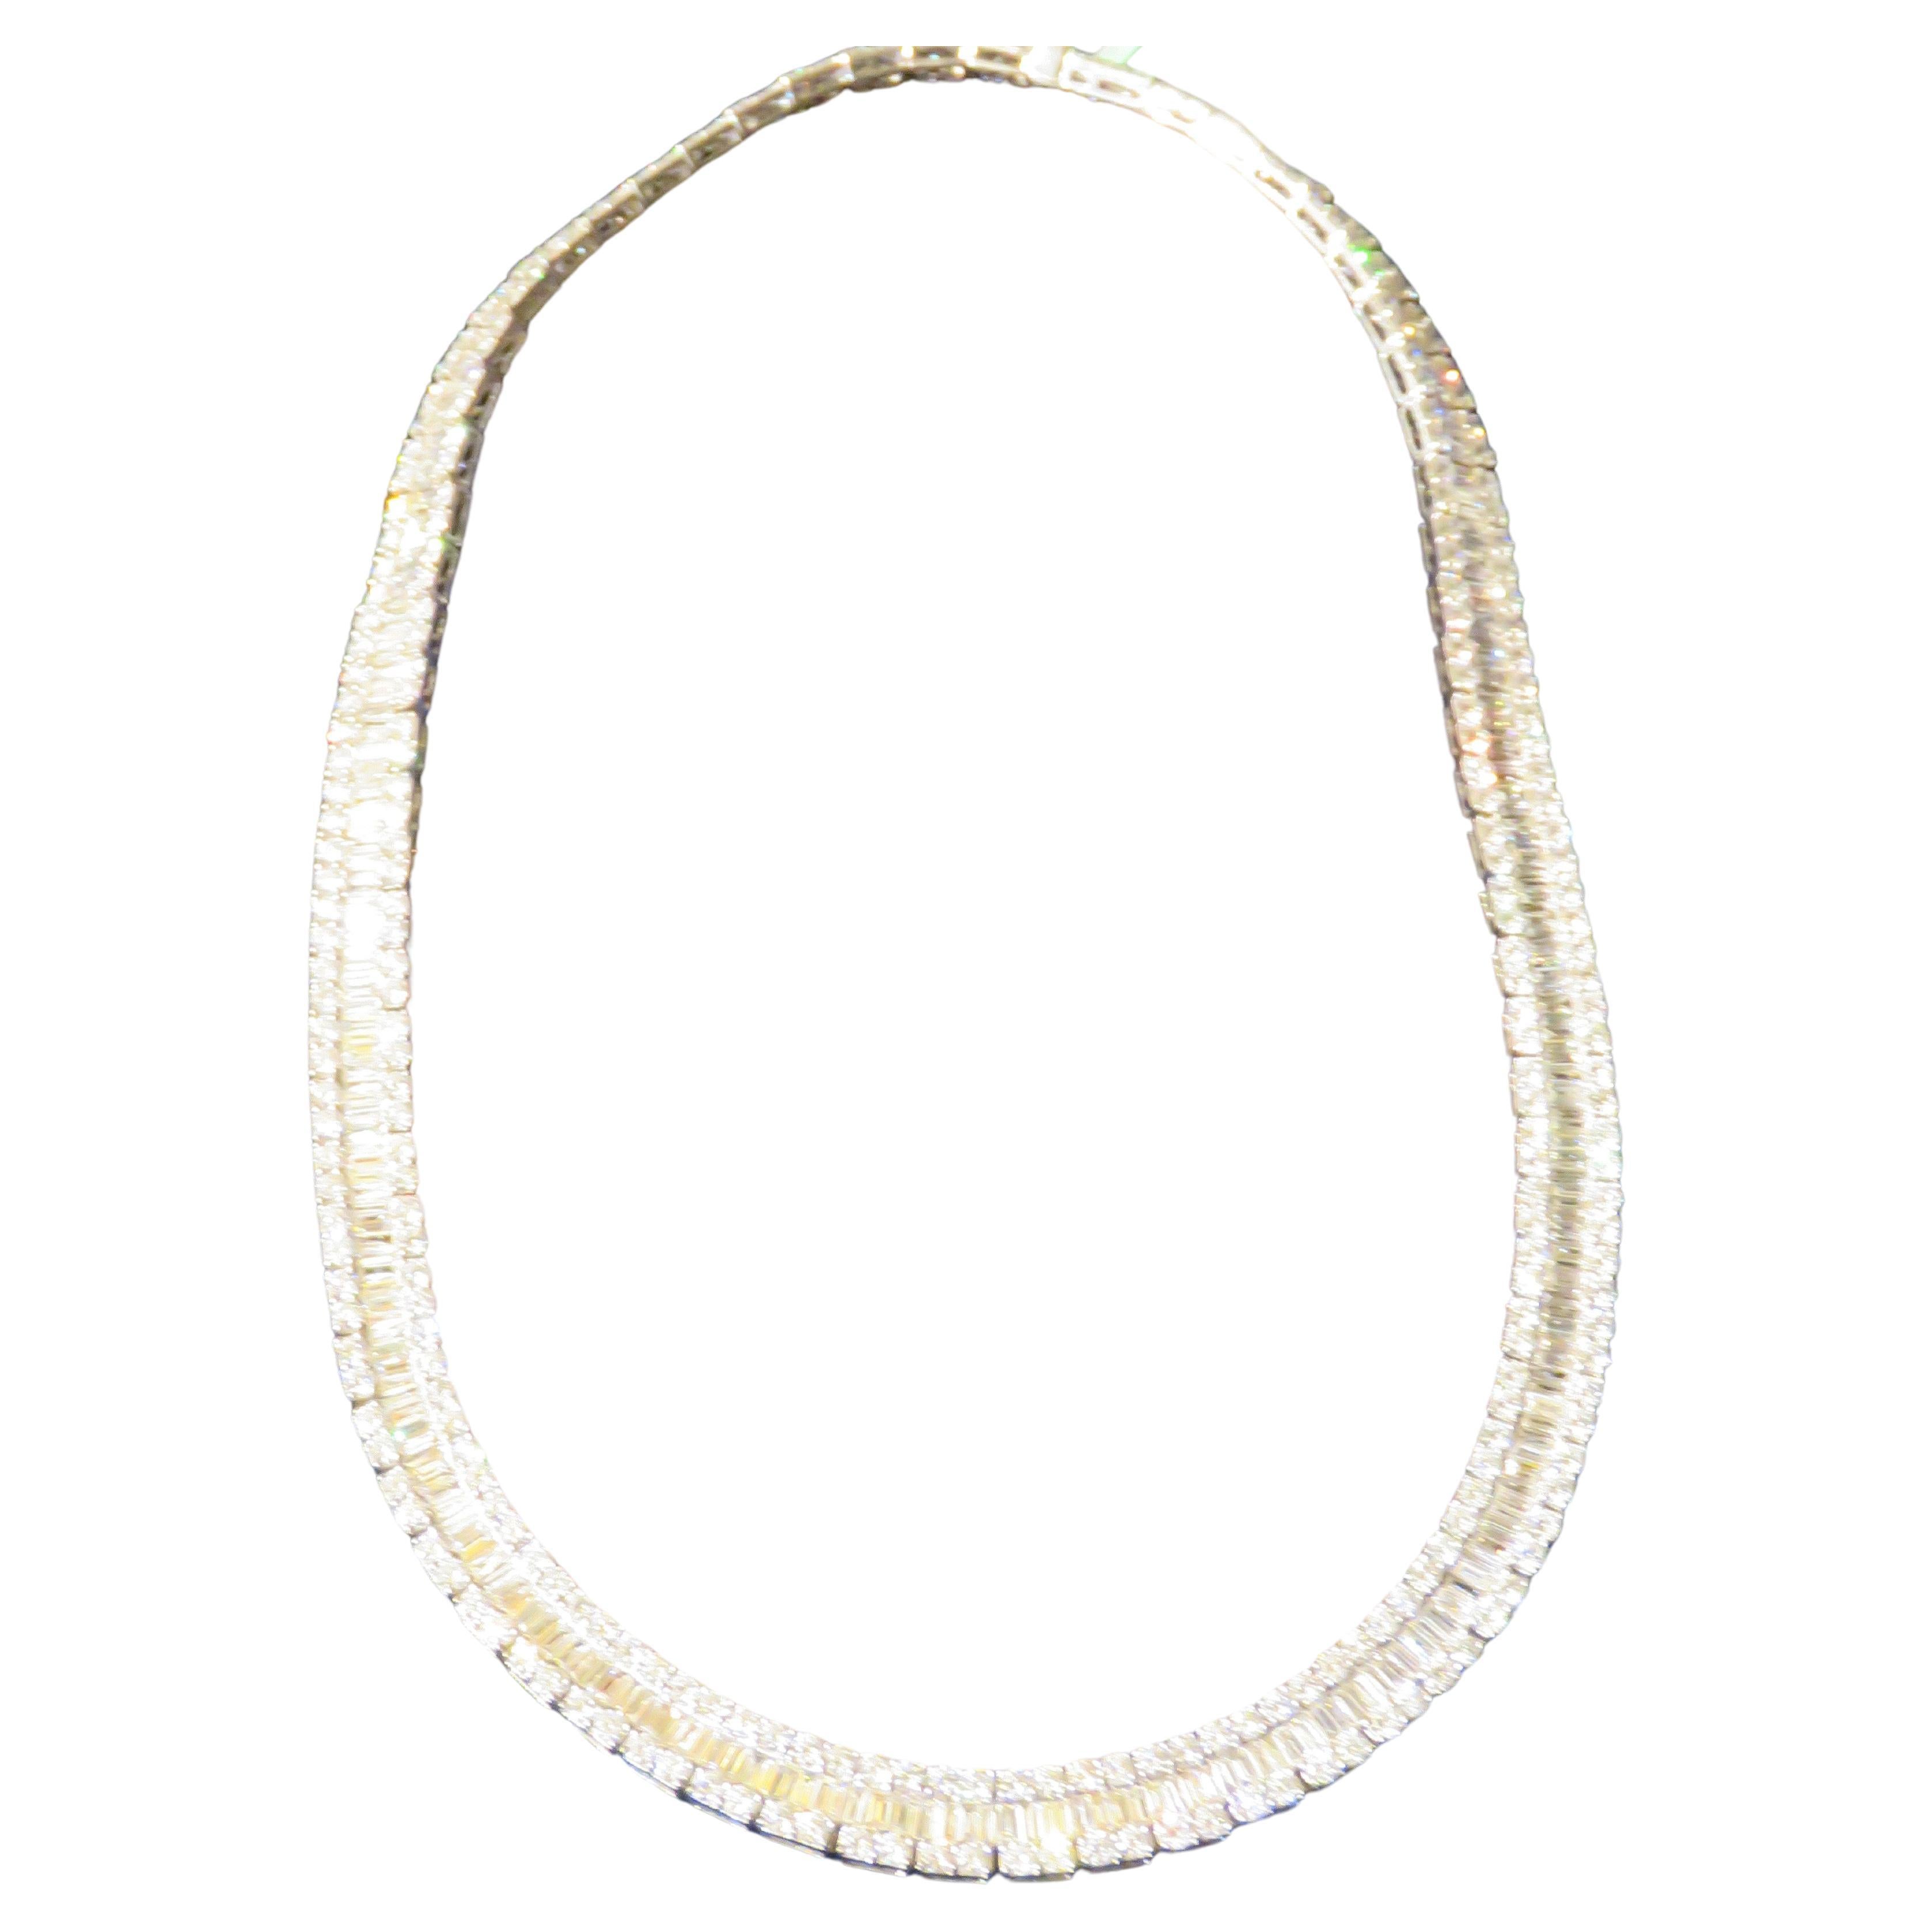 NWT $205, 735 18KT Gold Rare Fancy Glittering 32.50CT Baguette Diamond Necklace For Sale